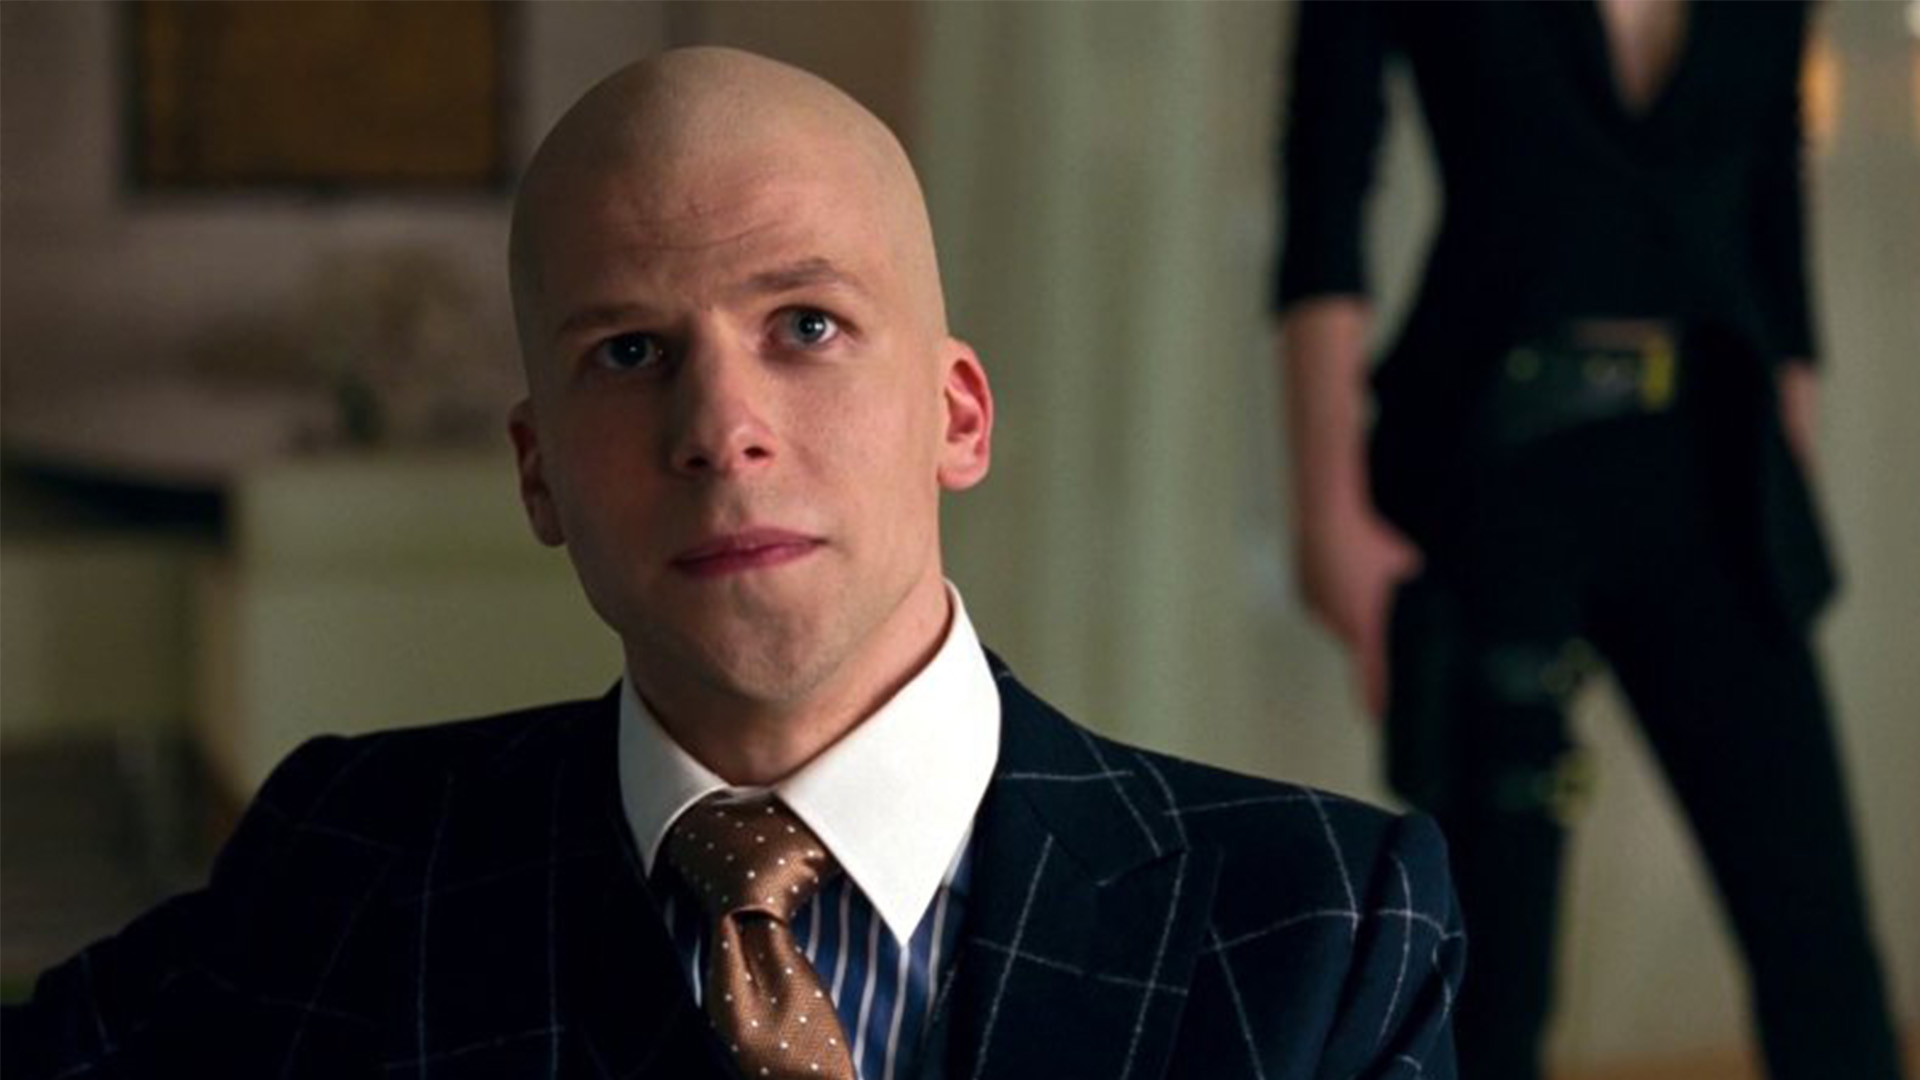 Still of lex luthor from Justice League